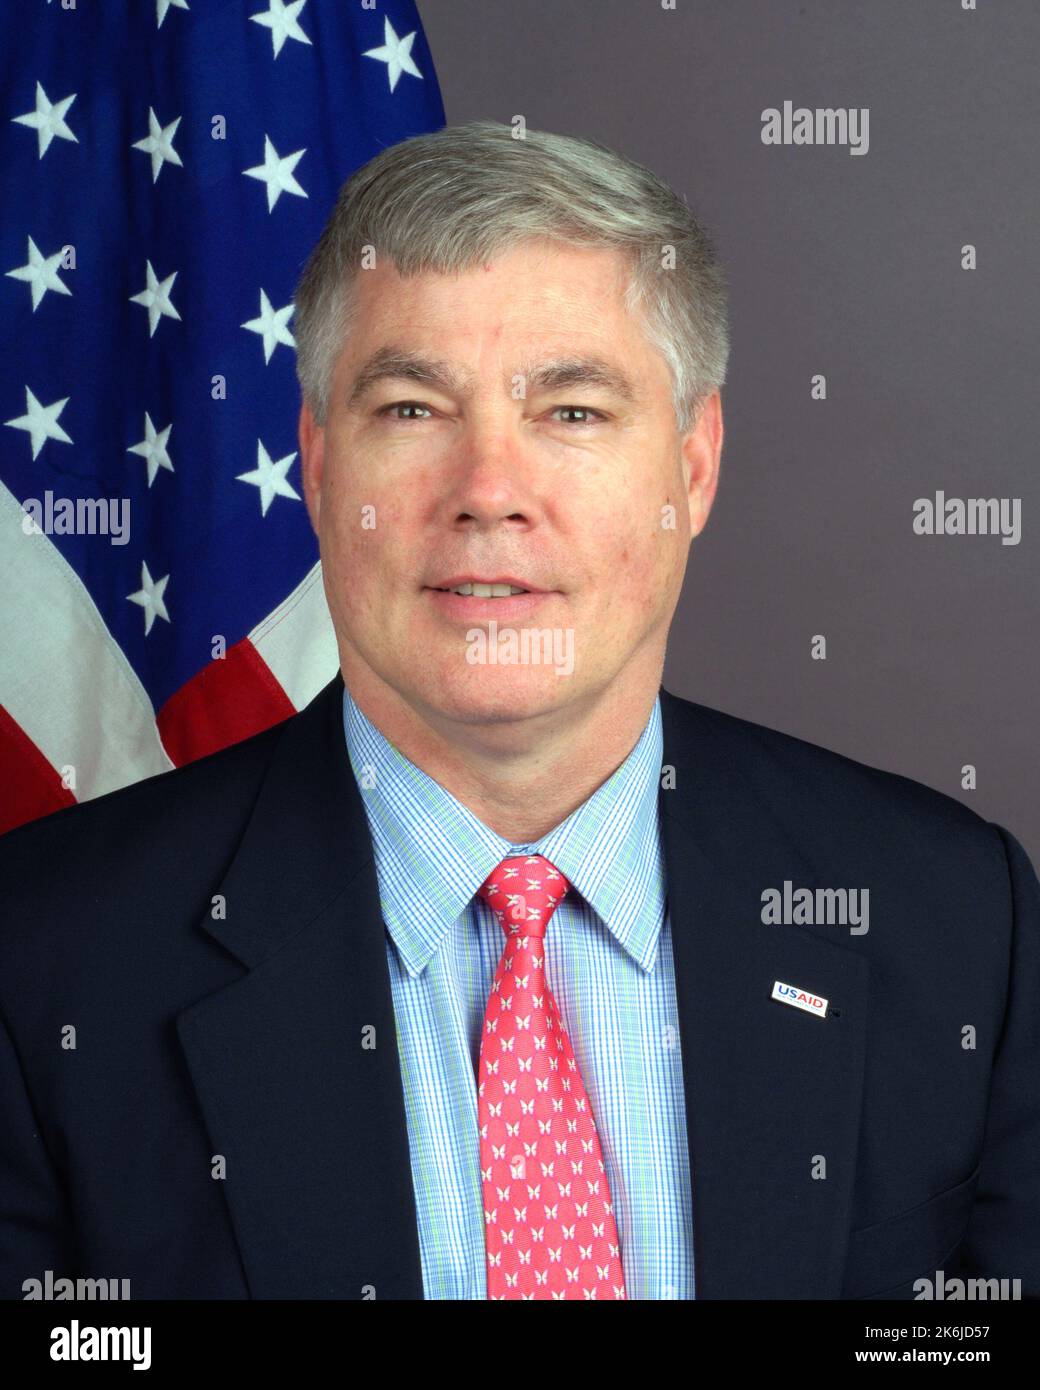 Official portrait of Michael Hess, U.S. Agency for International Development Assistant Administrator for the Bureau of Democracy, Conflict, and Humanitarian Assistance Stock Photo